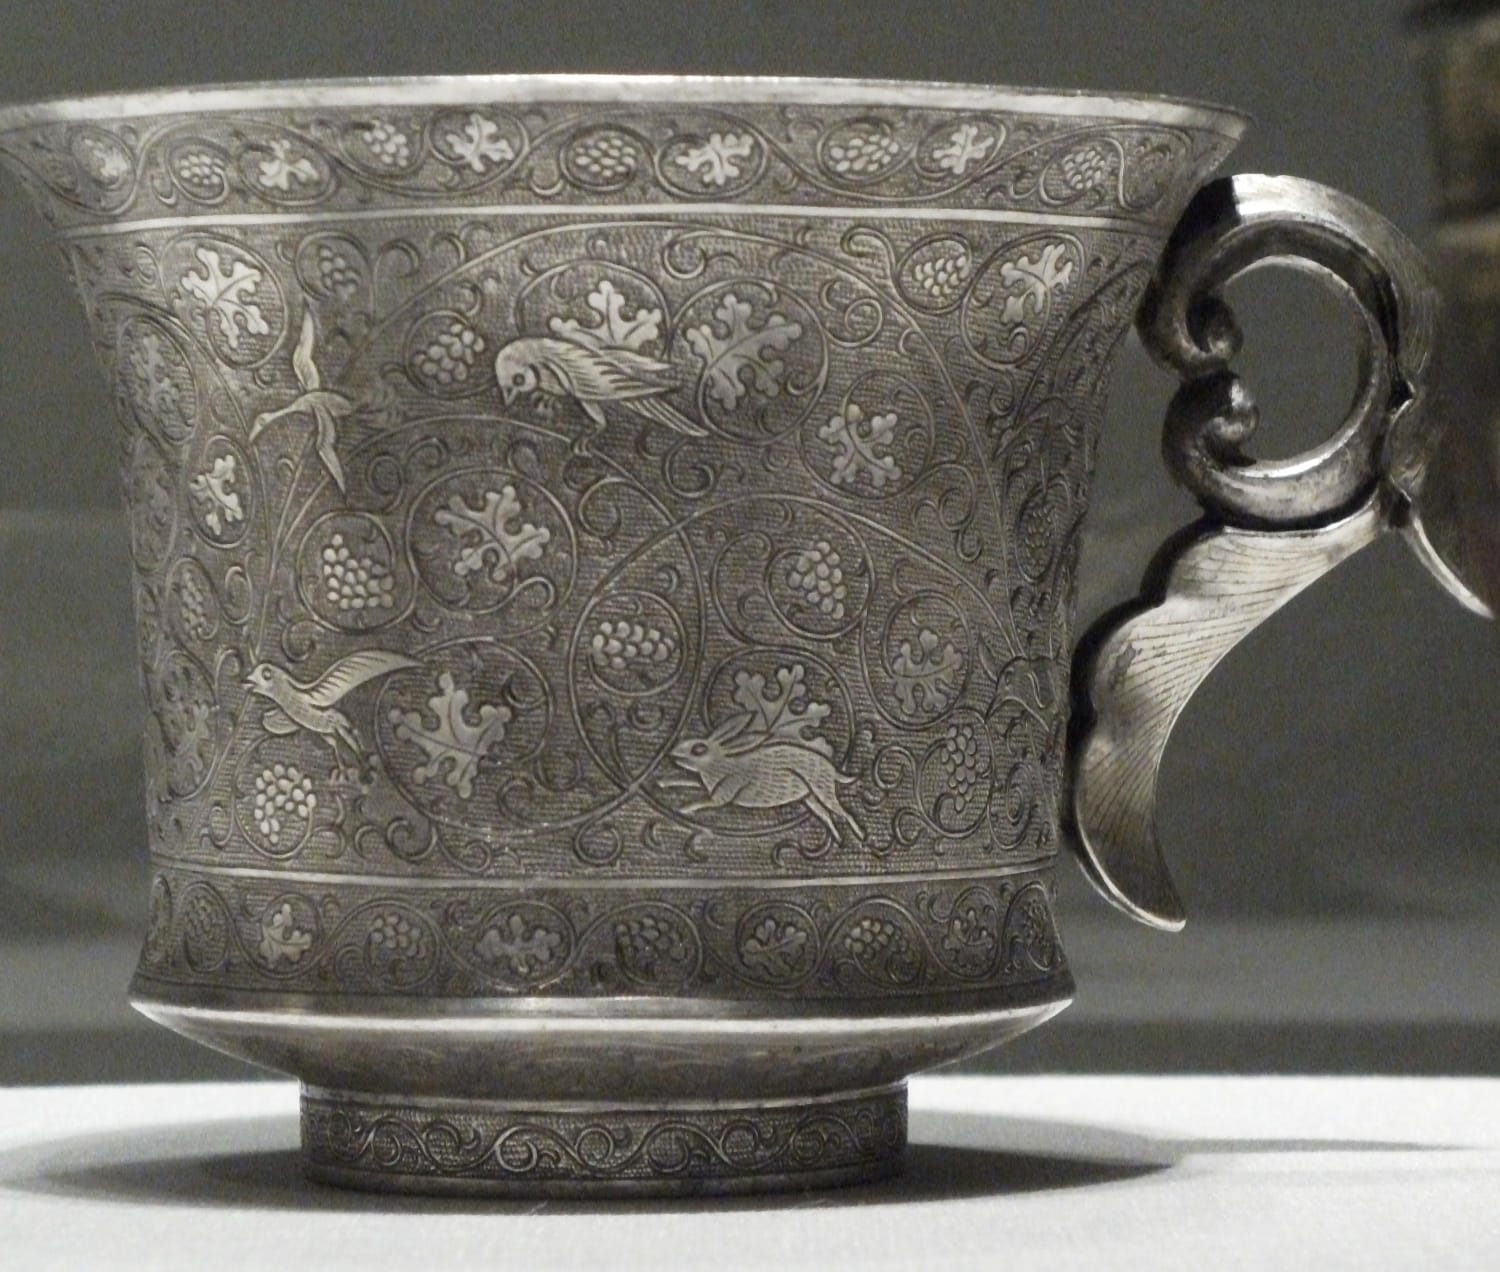 Silver wine cup, with birds and a rabbit amid scrolling plant forms. From China, Tang Dynasty, 8th century CE, now housed at the Freer Gallery of Art in Washington, D.C.